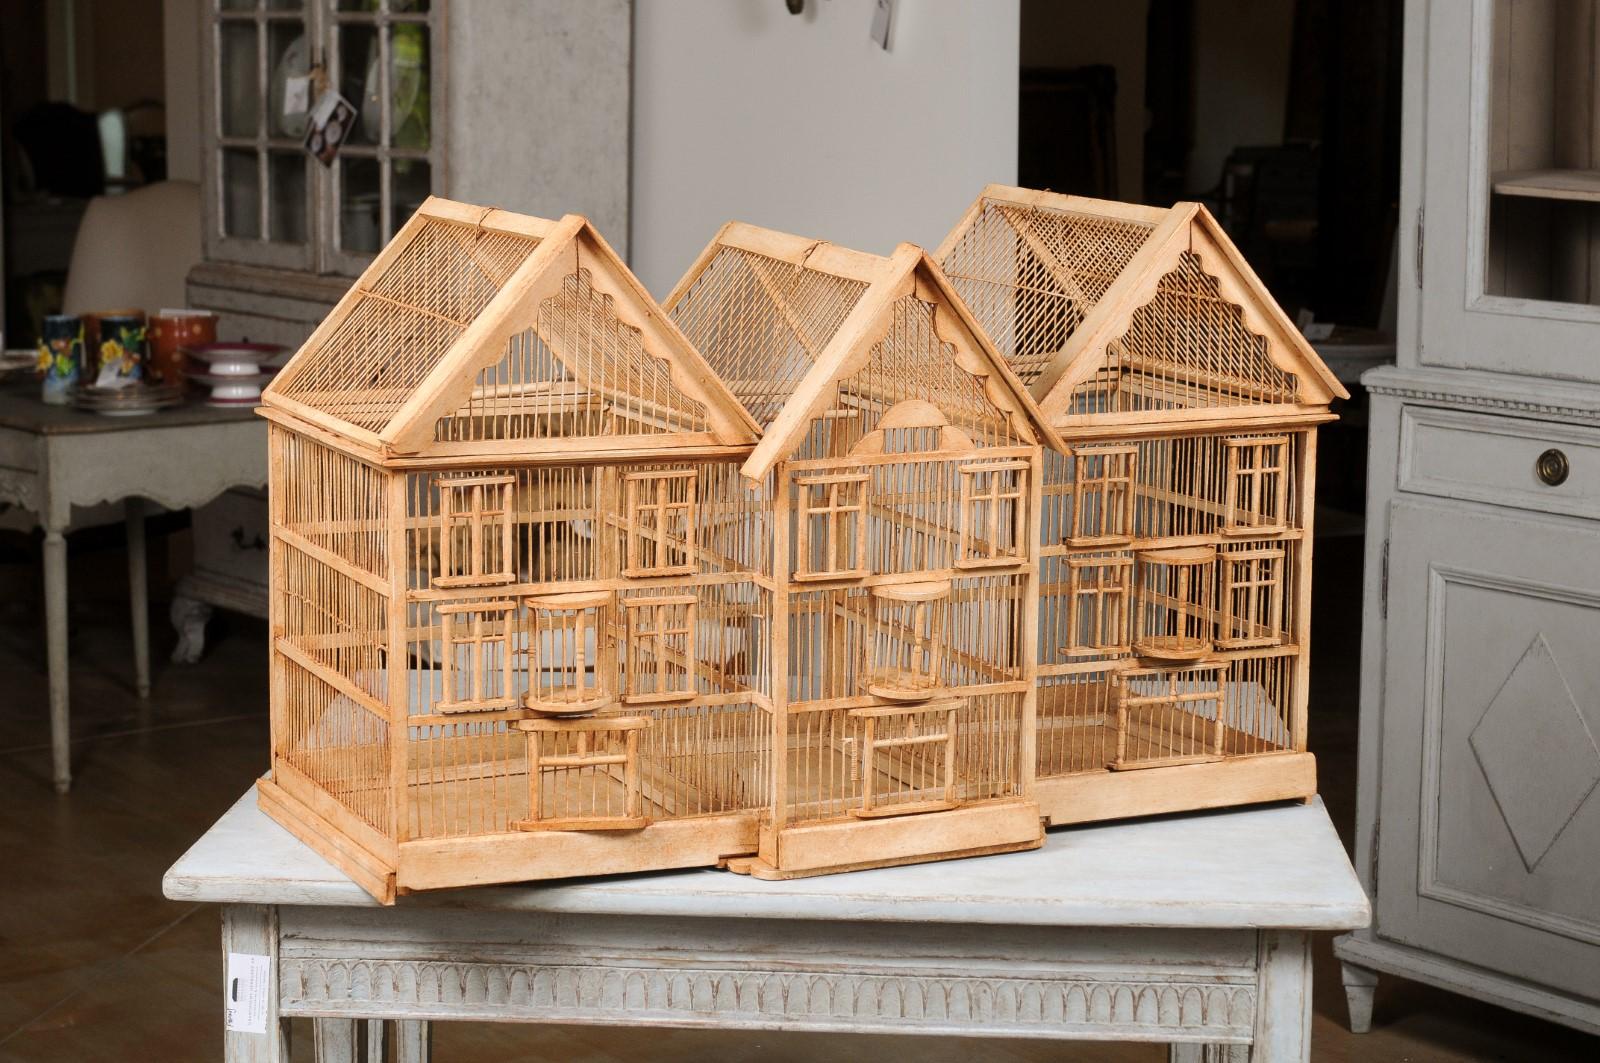 A French wooden château birdcage from the late 19th century, with slanted roofs and break front. Created in France during the later years of the 19th century, this wooden birdcage charms us with the perfect contrast between its rustic, natural